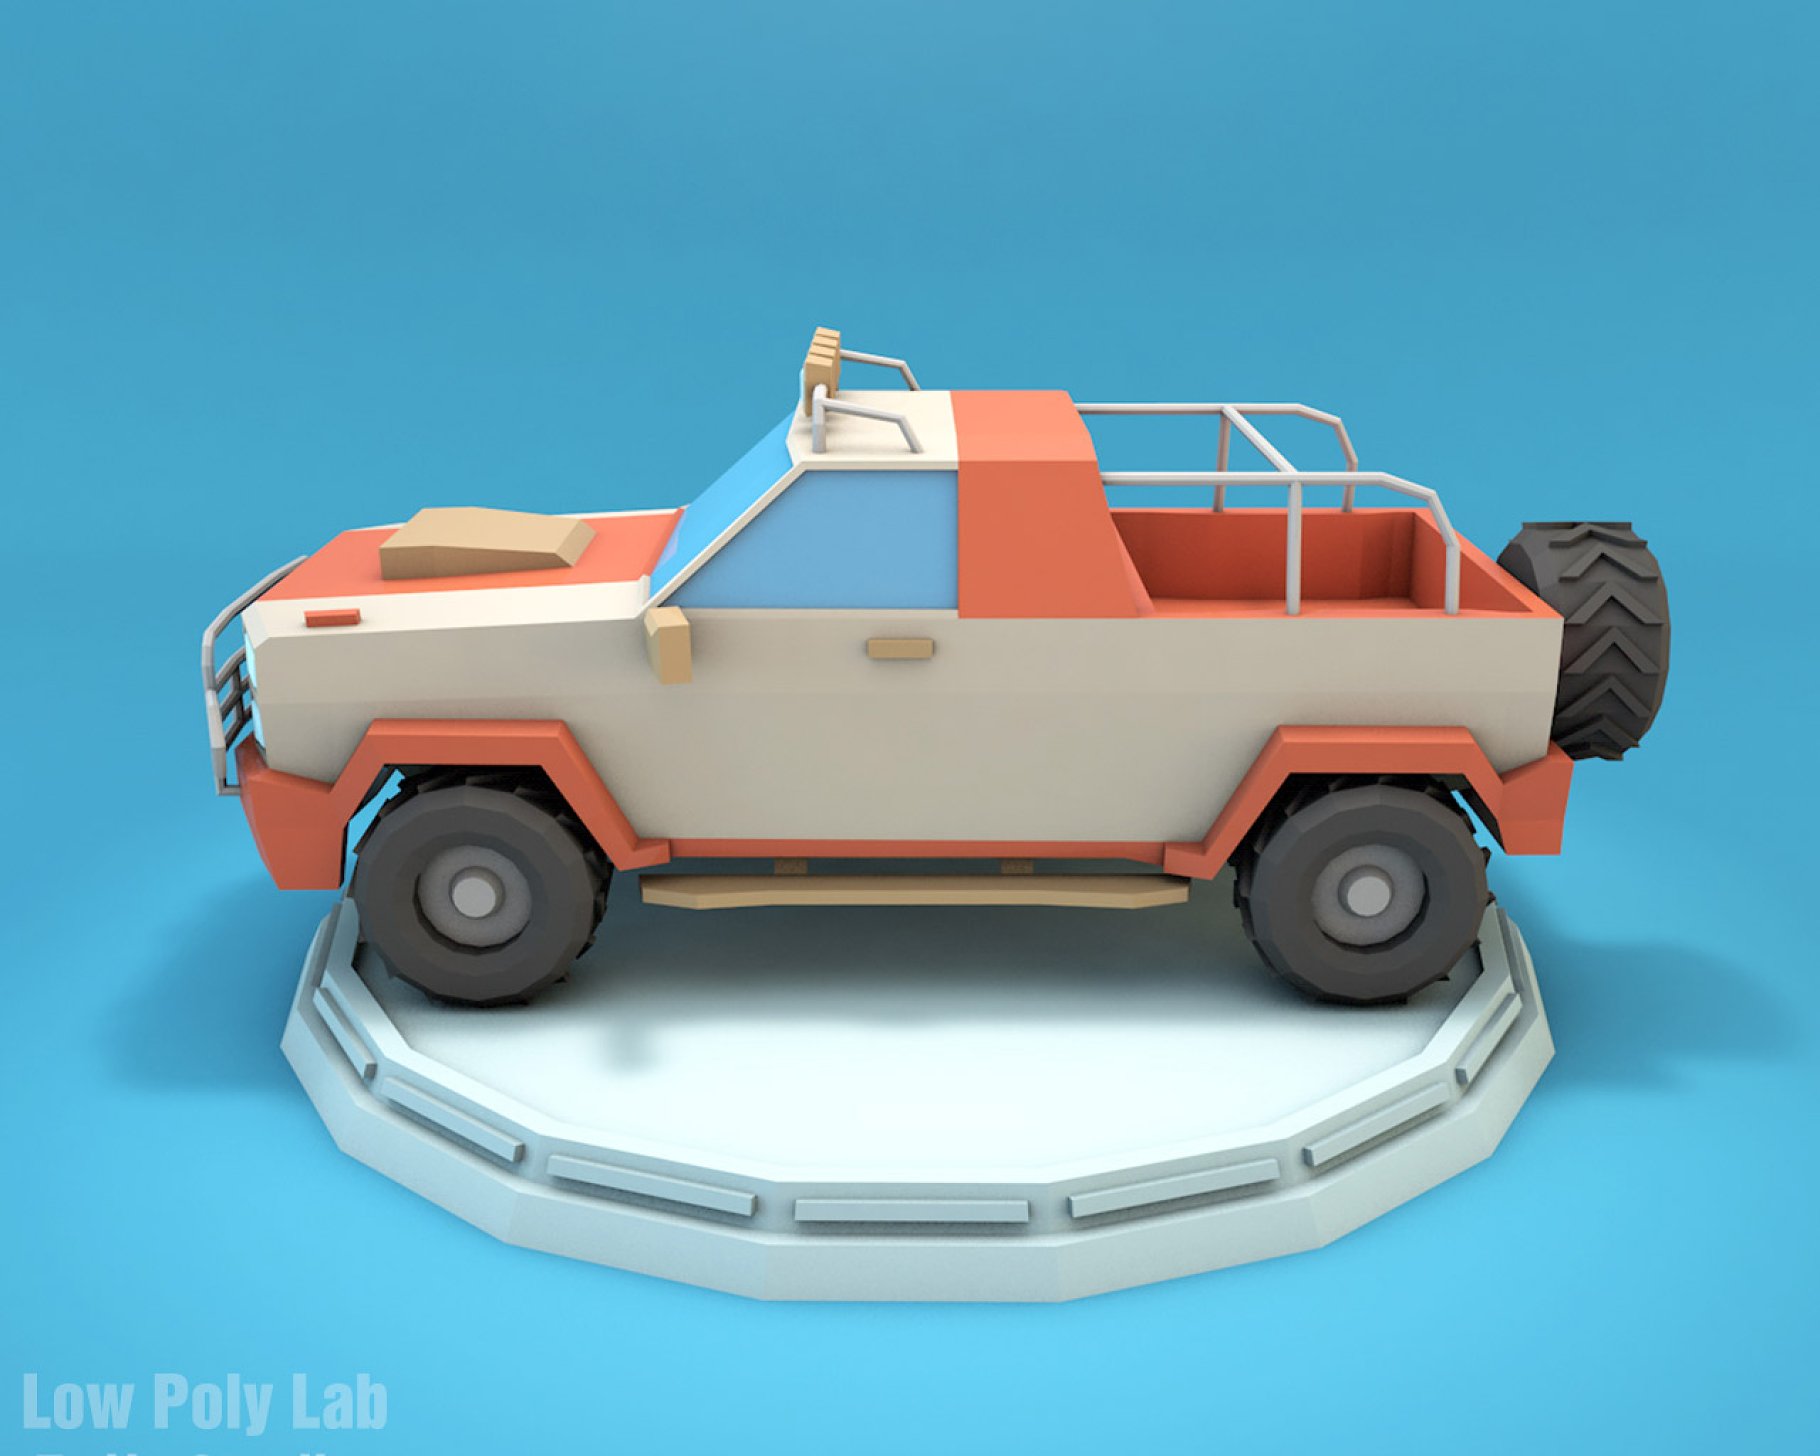 Mockup of color low poly jeep in the side.